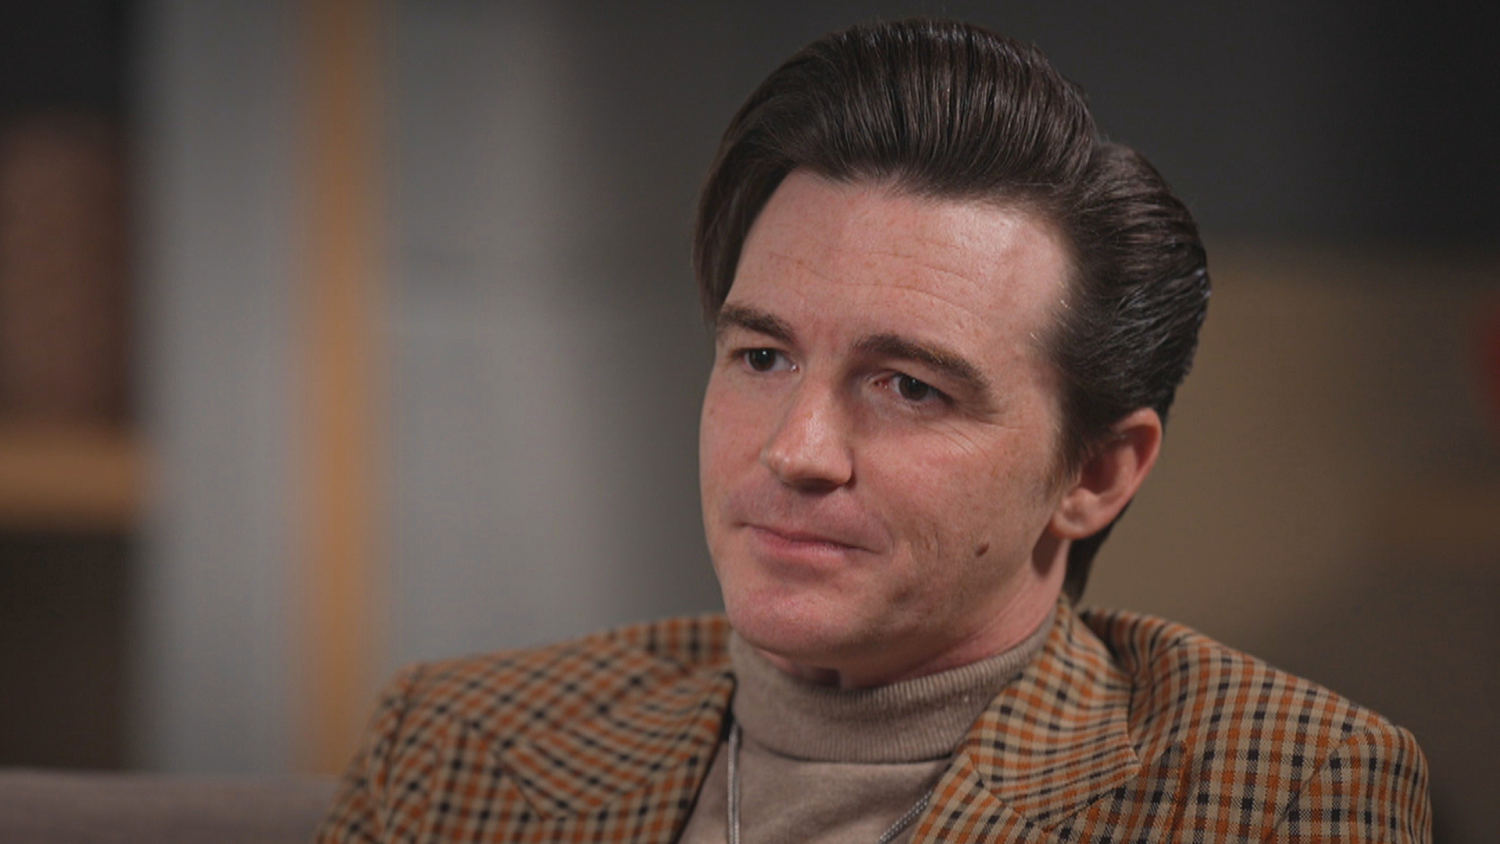 Exclusive: Drake Bell reflects on the aftermath of ‘Quiet on Set’